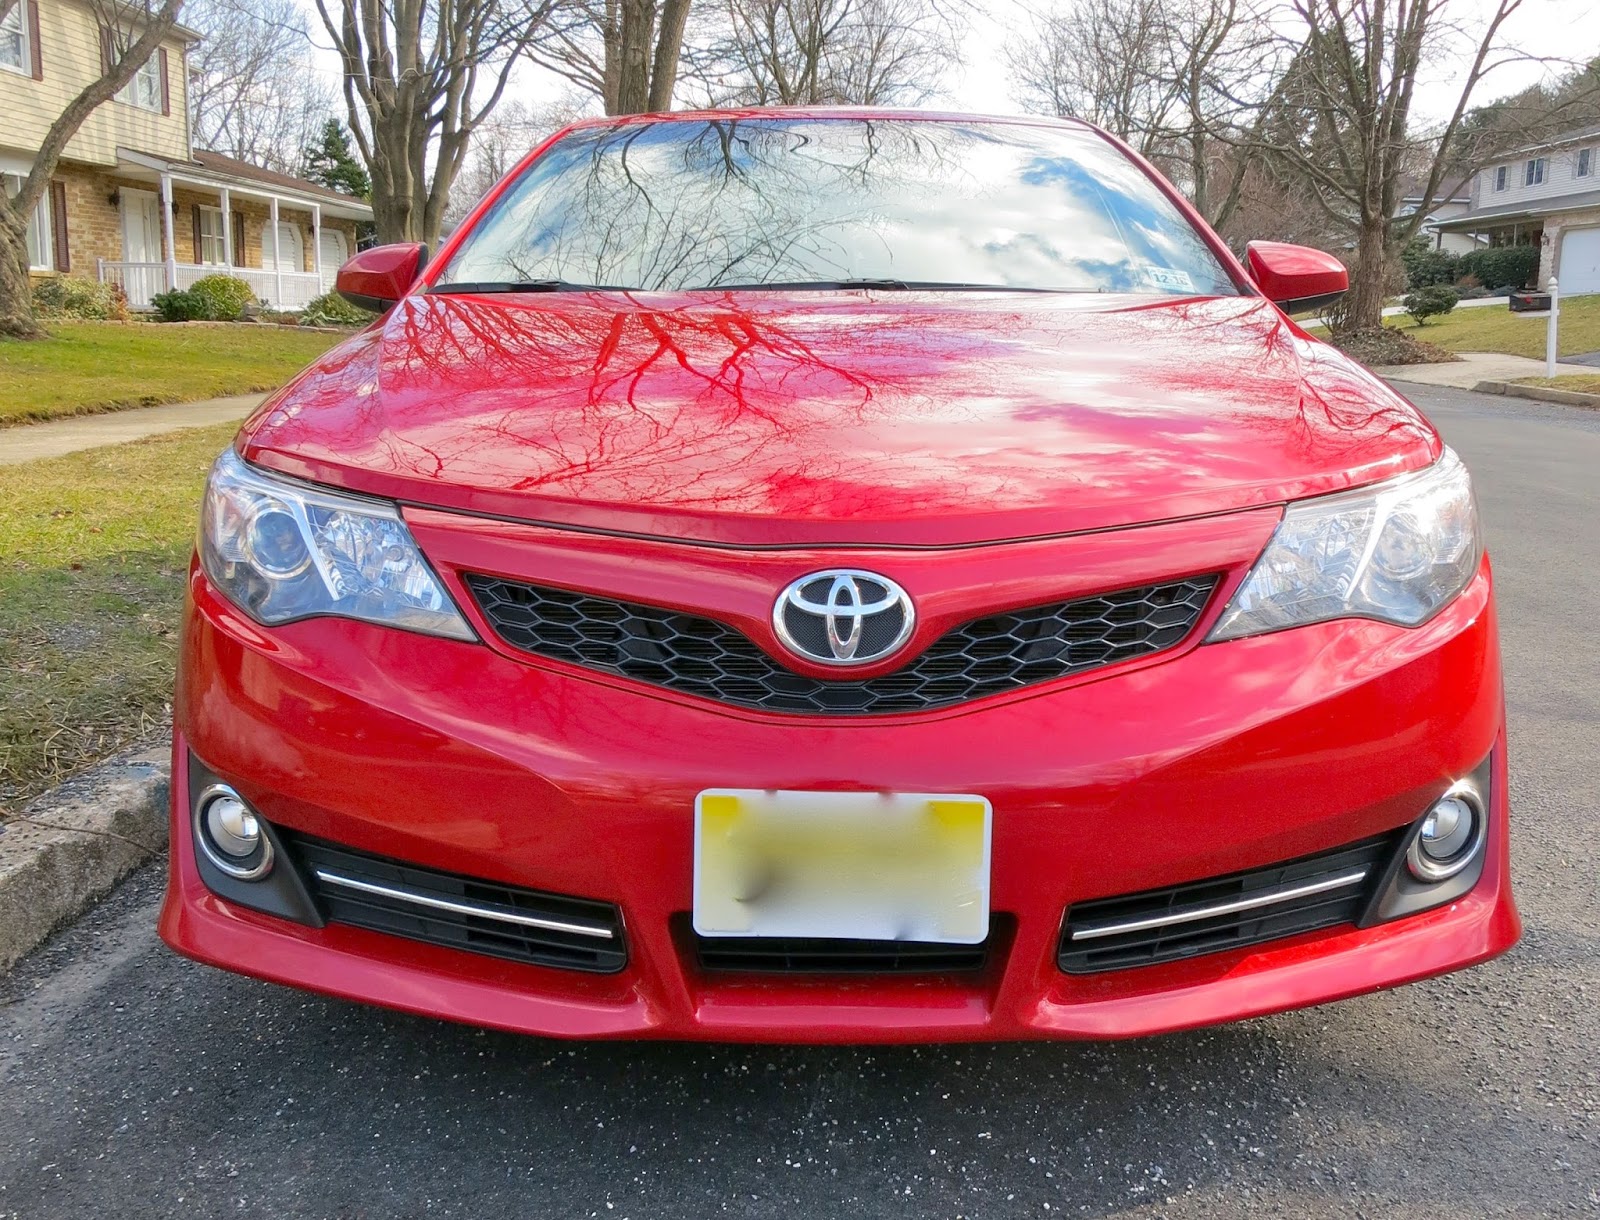 automobiles, Camry, car reviews, Cars, driving experiences, Toyota, Toyota Camry, 